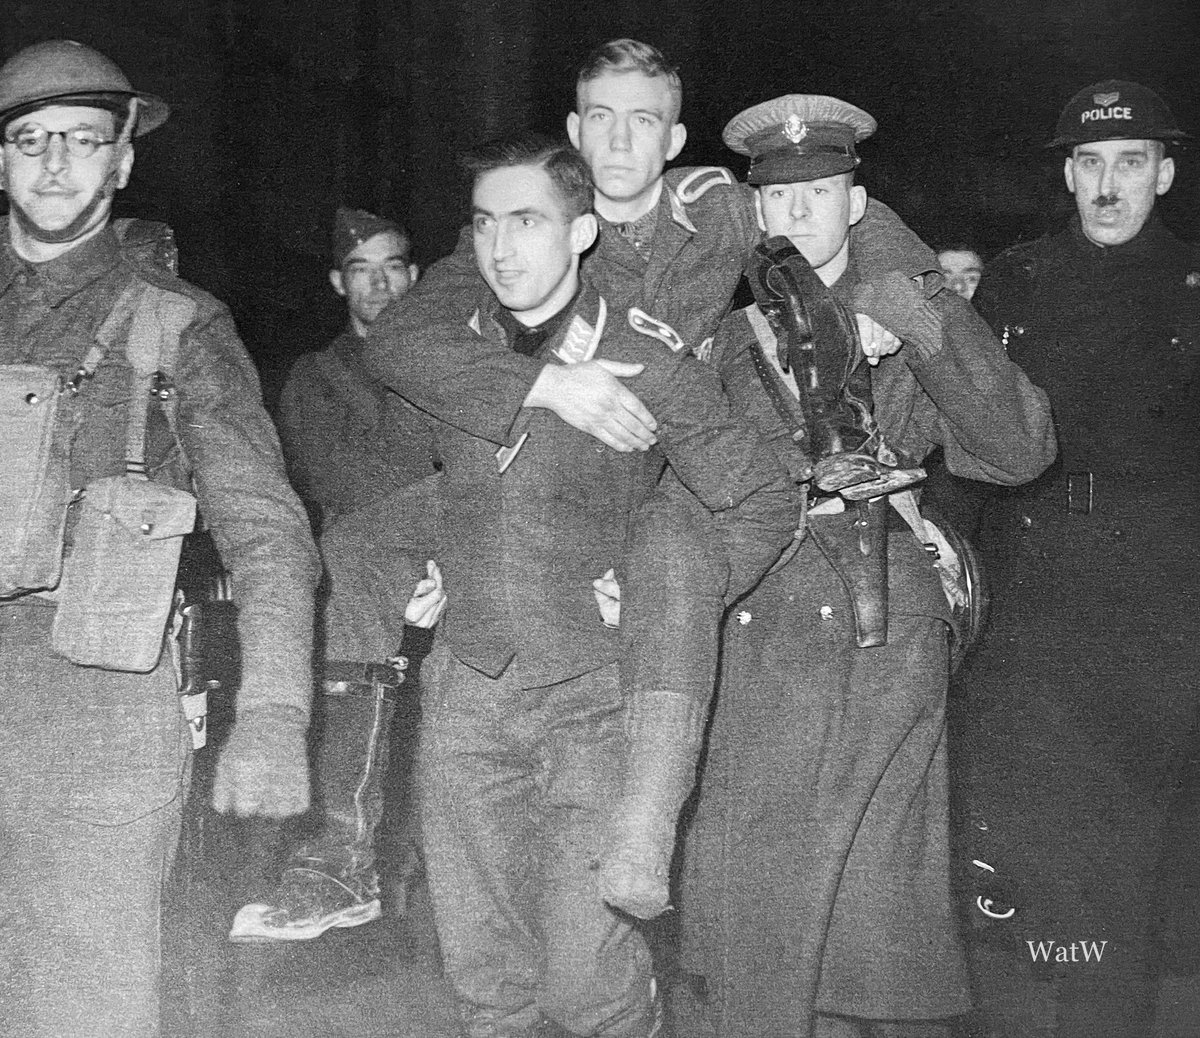 A German airman carries his injured comrade as they are escorted into captivity after being shot down - Manchester, England 1941 #pow #prisonerofwar #manchester #england